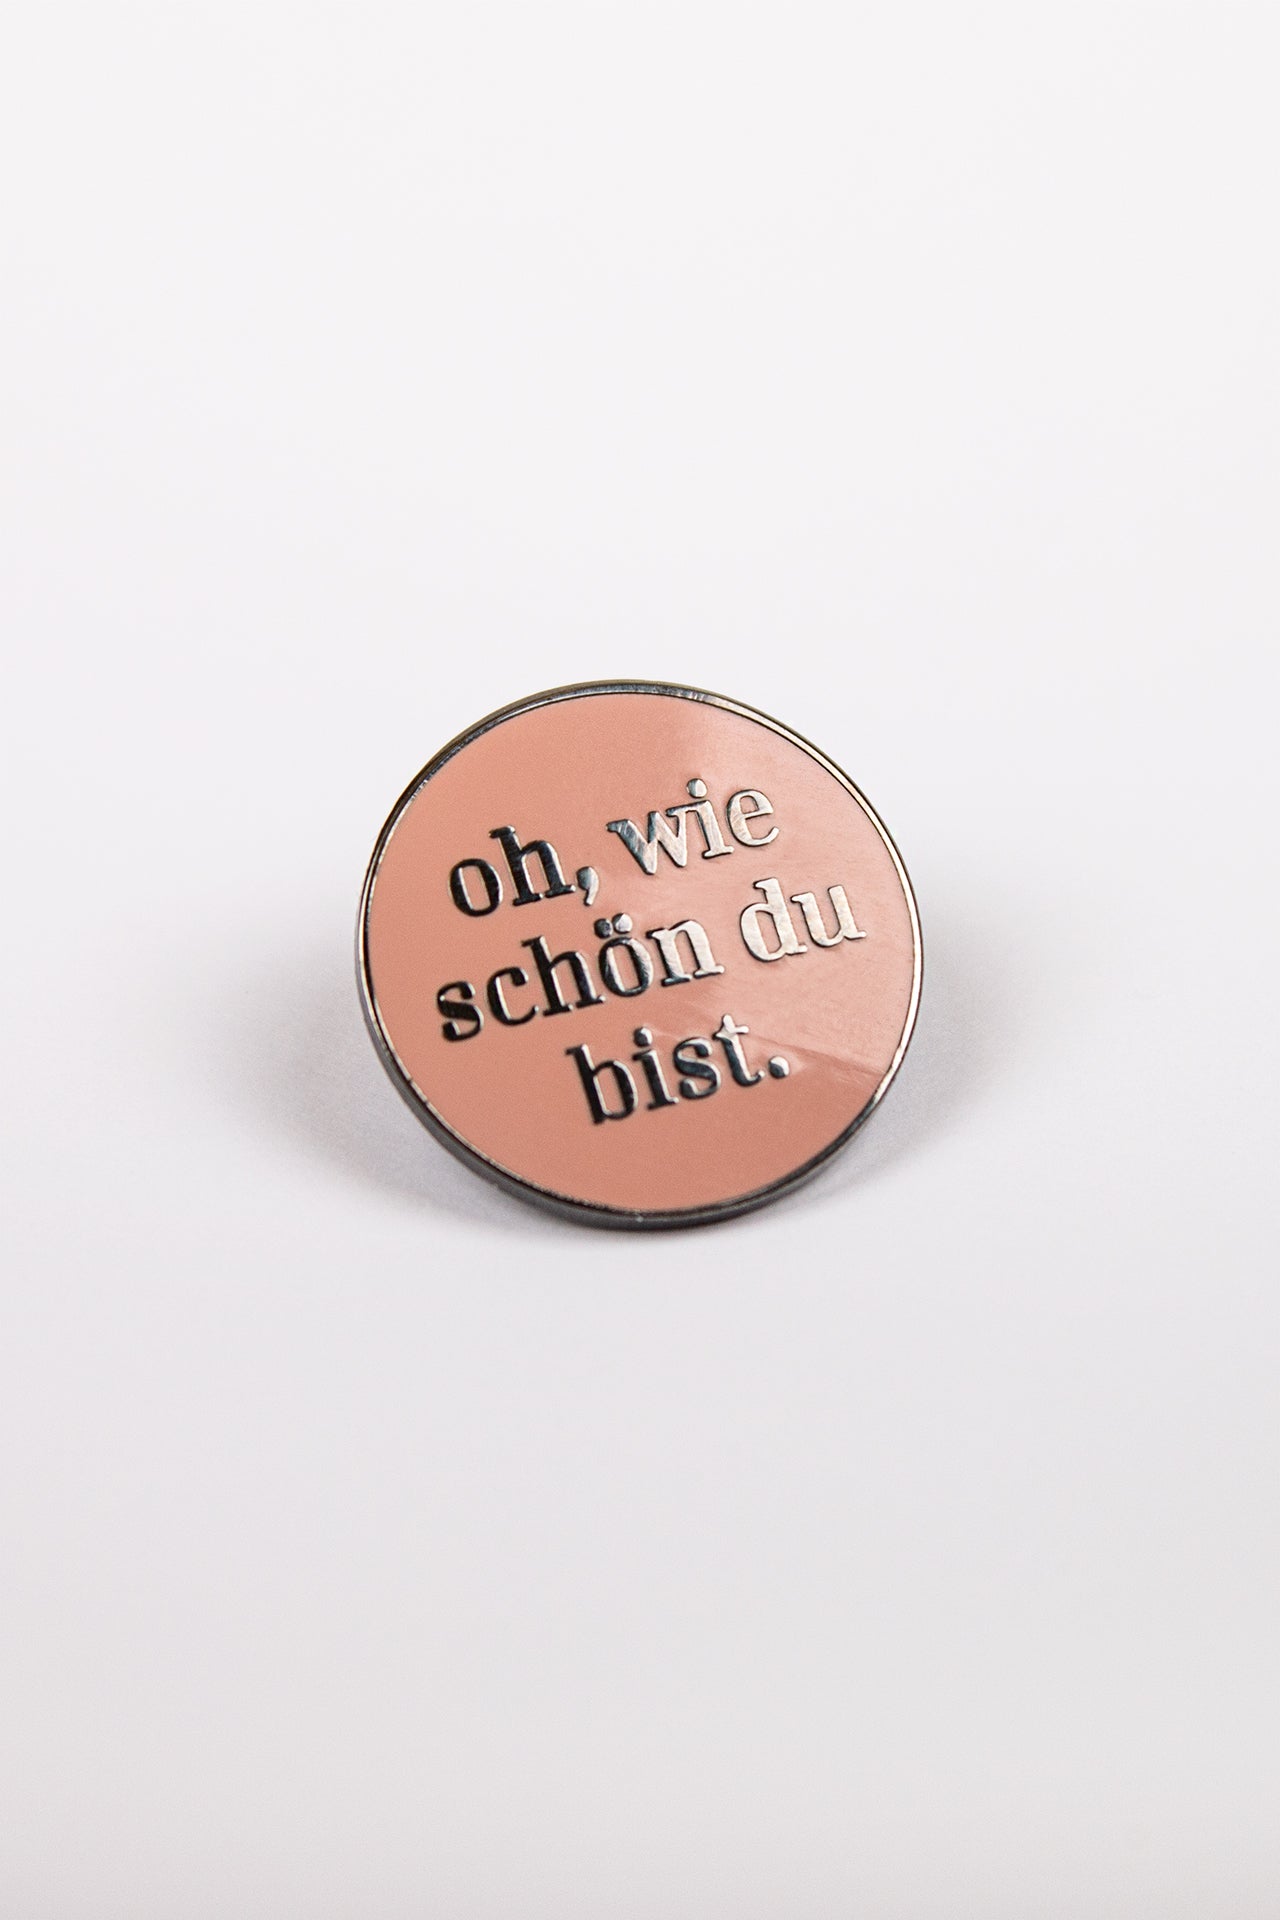 Pin with writing "Oh, how beautiful you are!" in rose